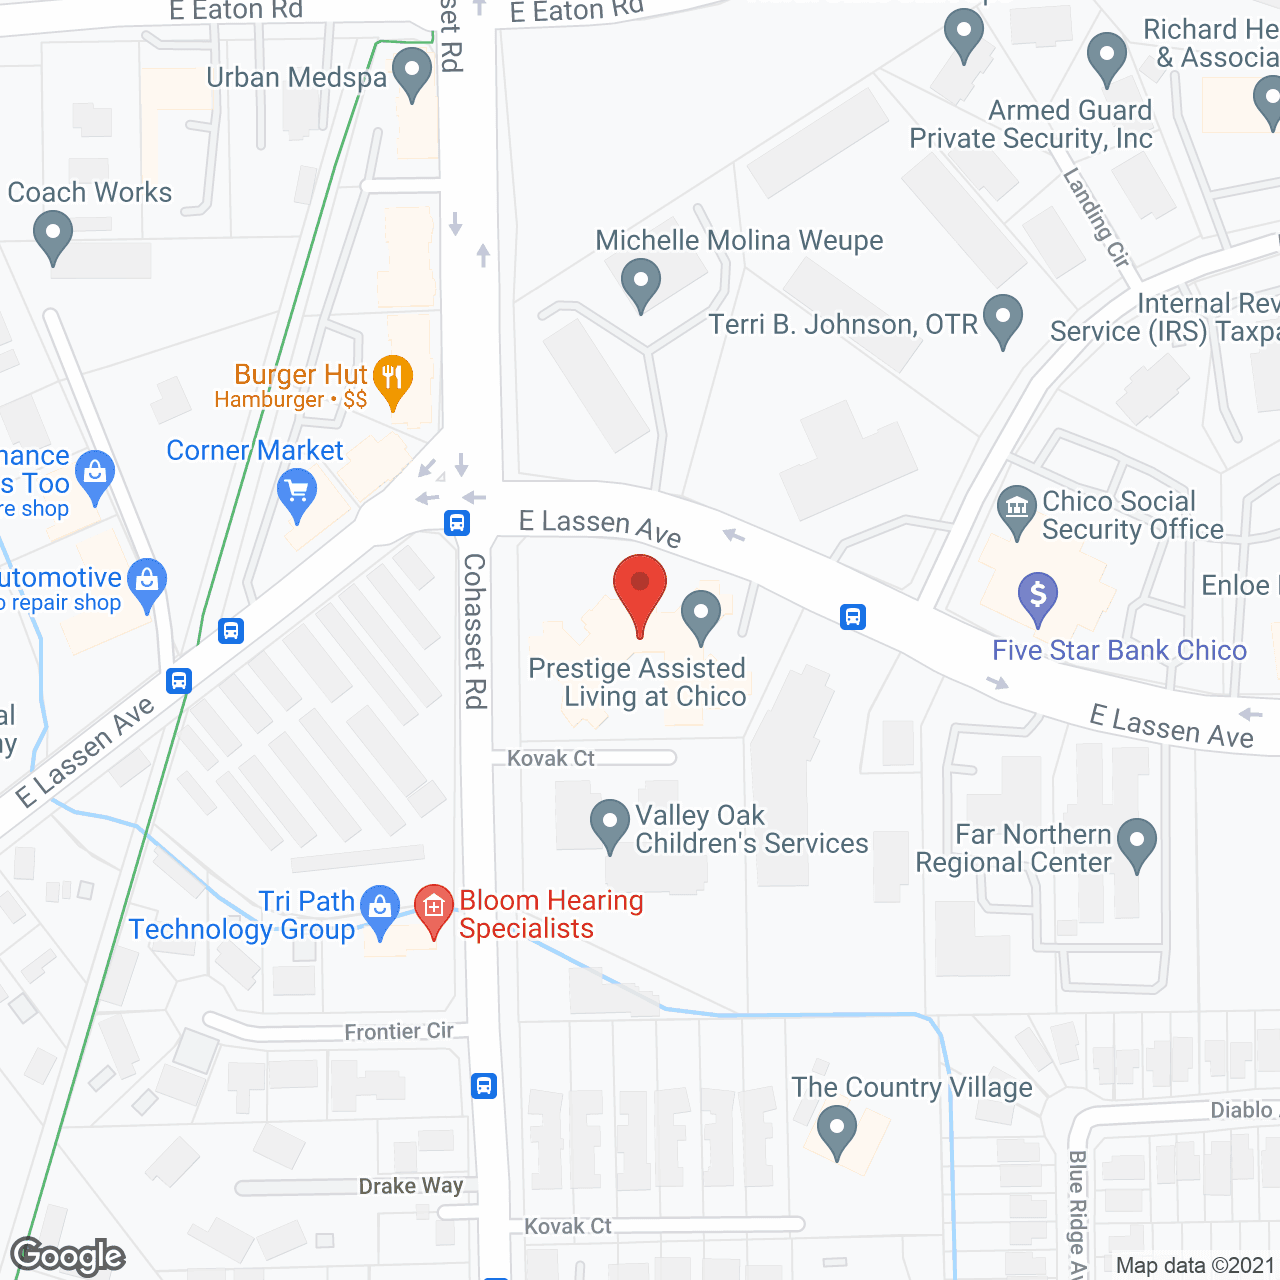 Prestige Assisted Living at Chico in google map